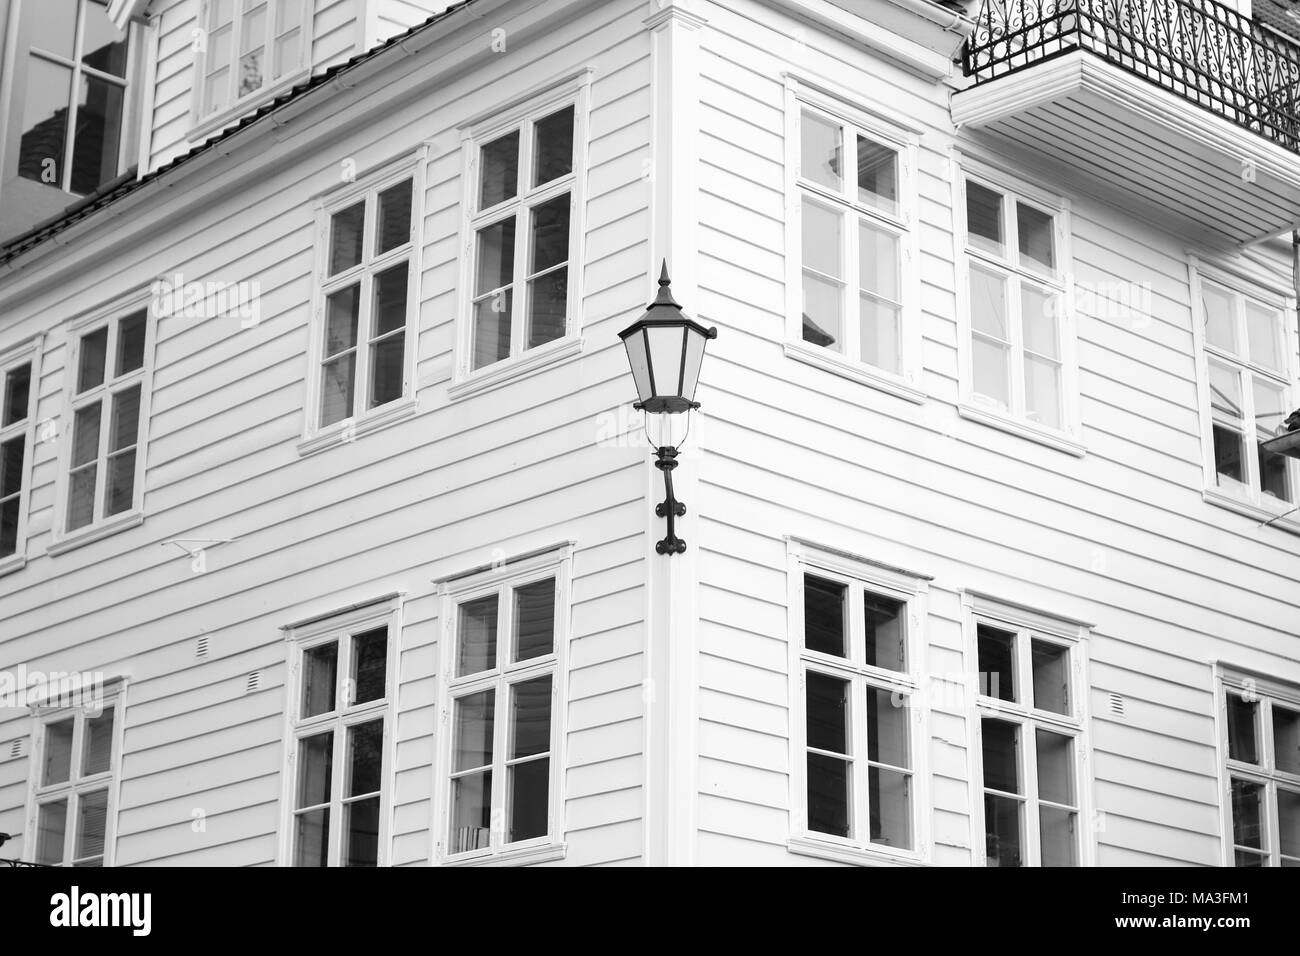 Corner of a house with lamp Stock Photo